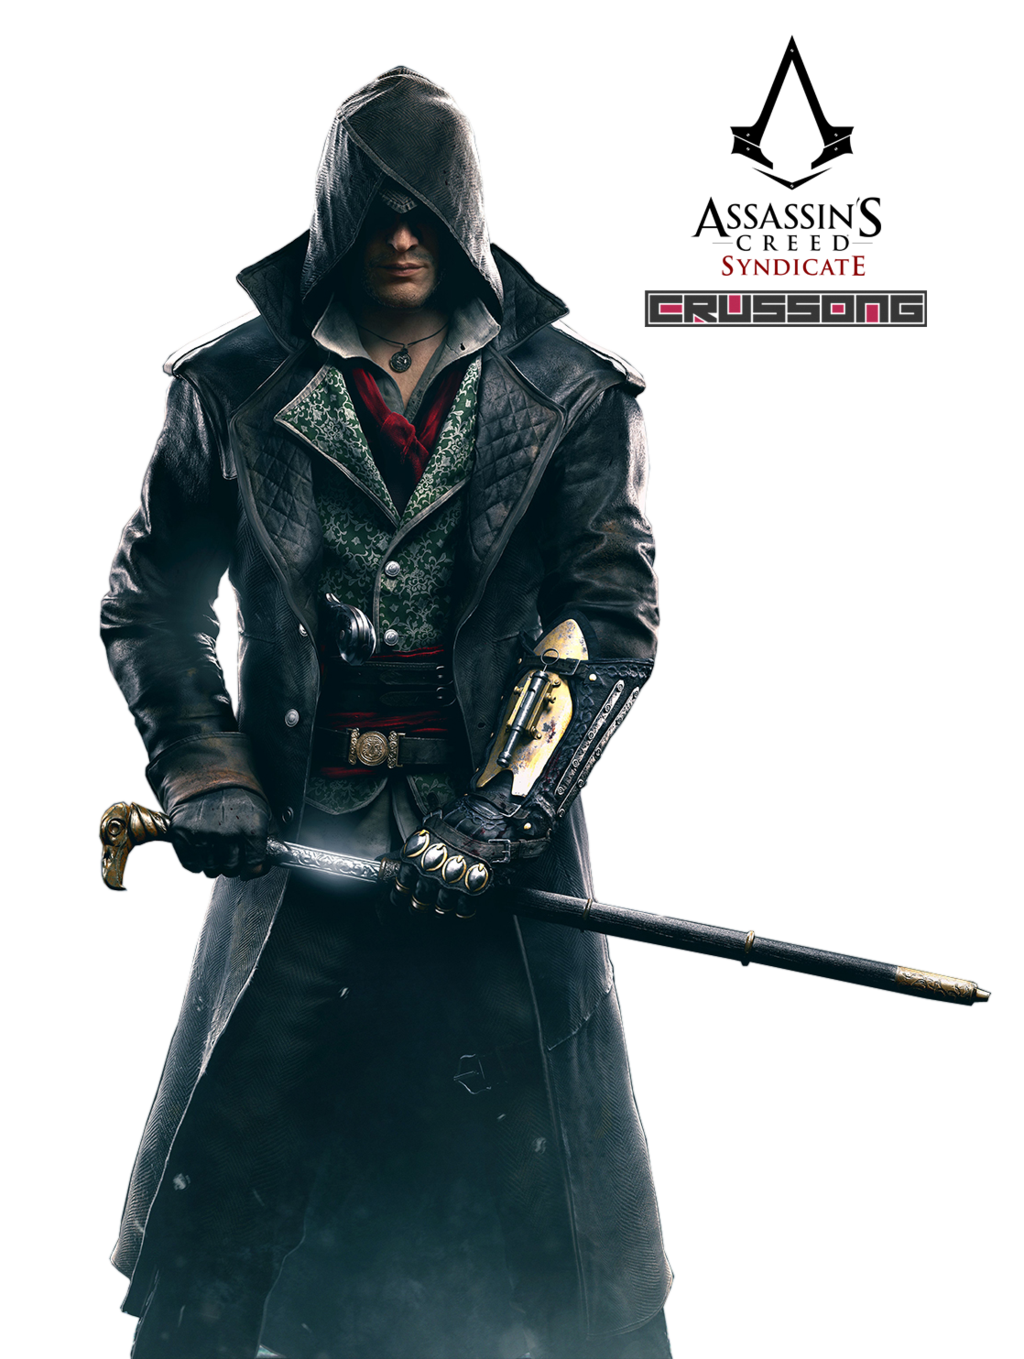 Assassin Creed Syndicate Transparent Image